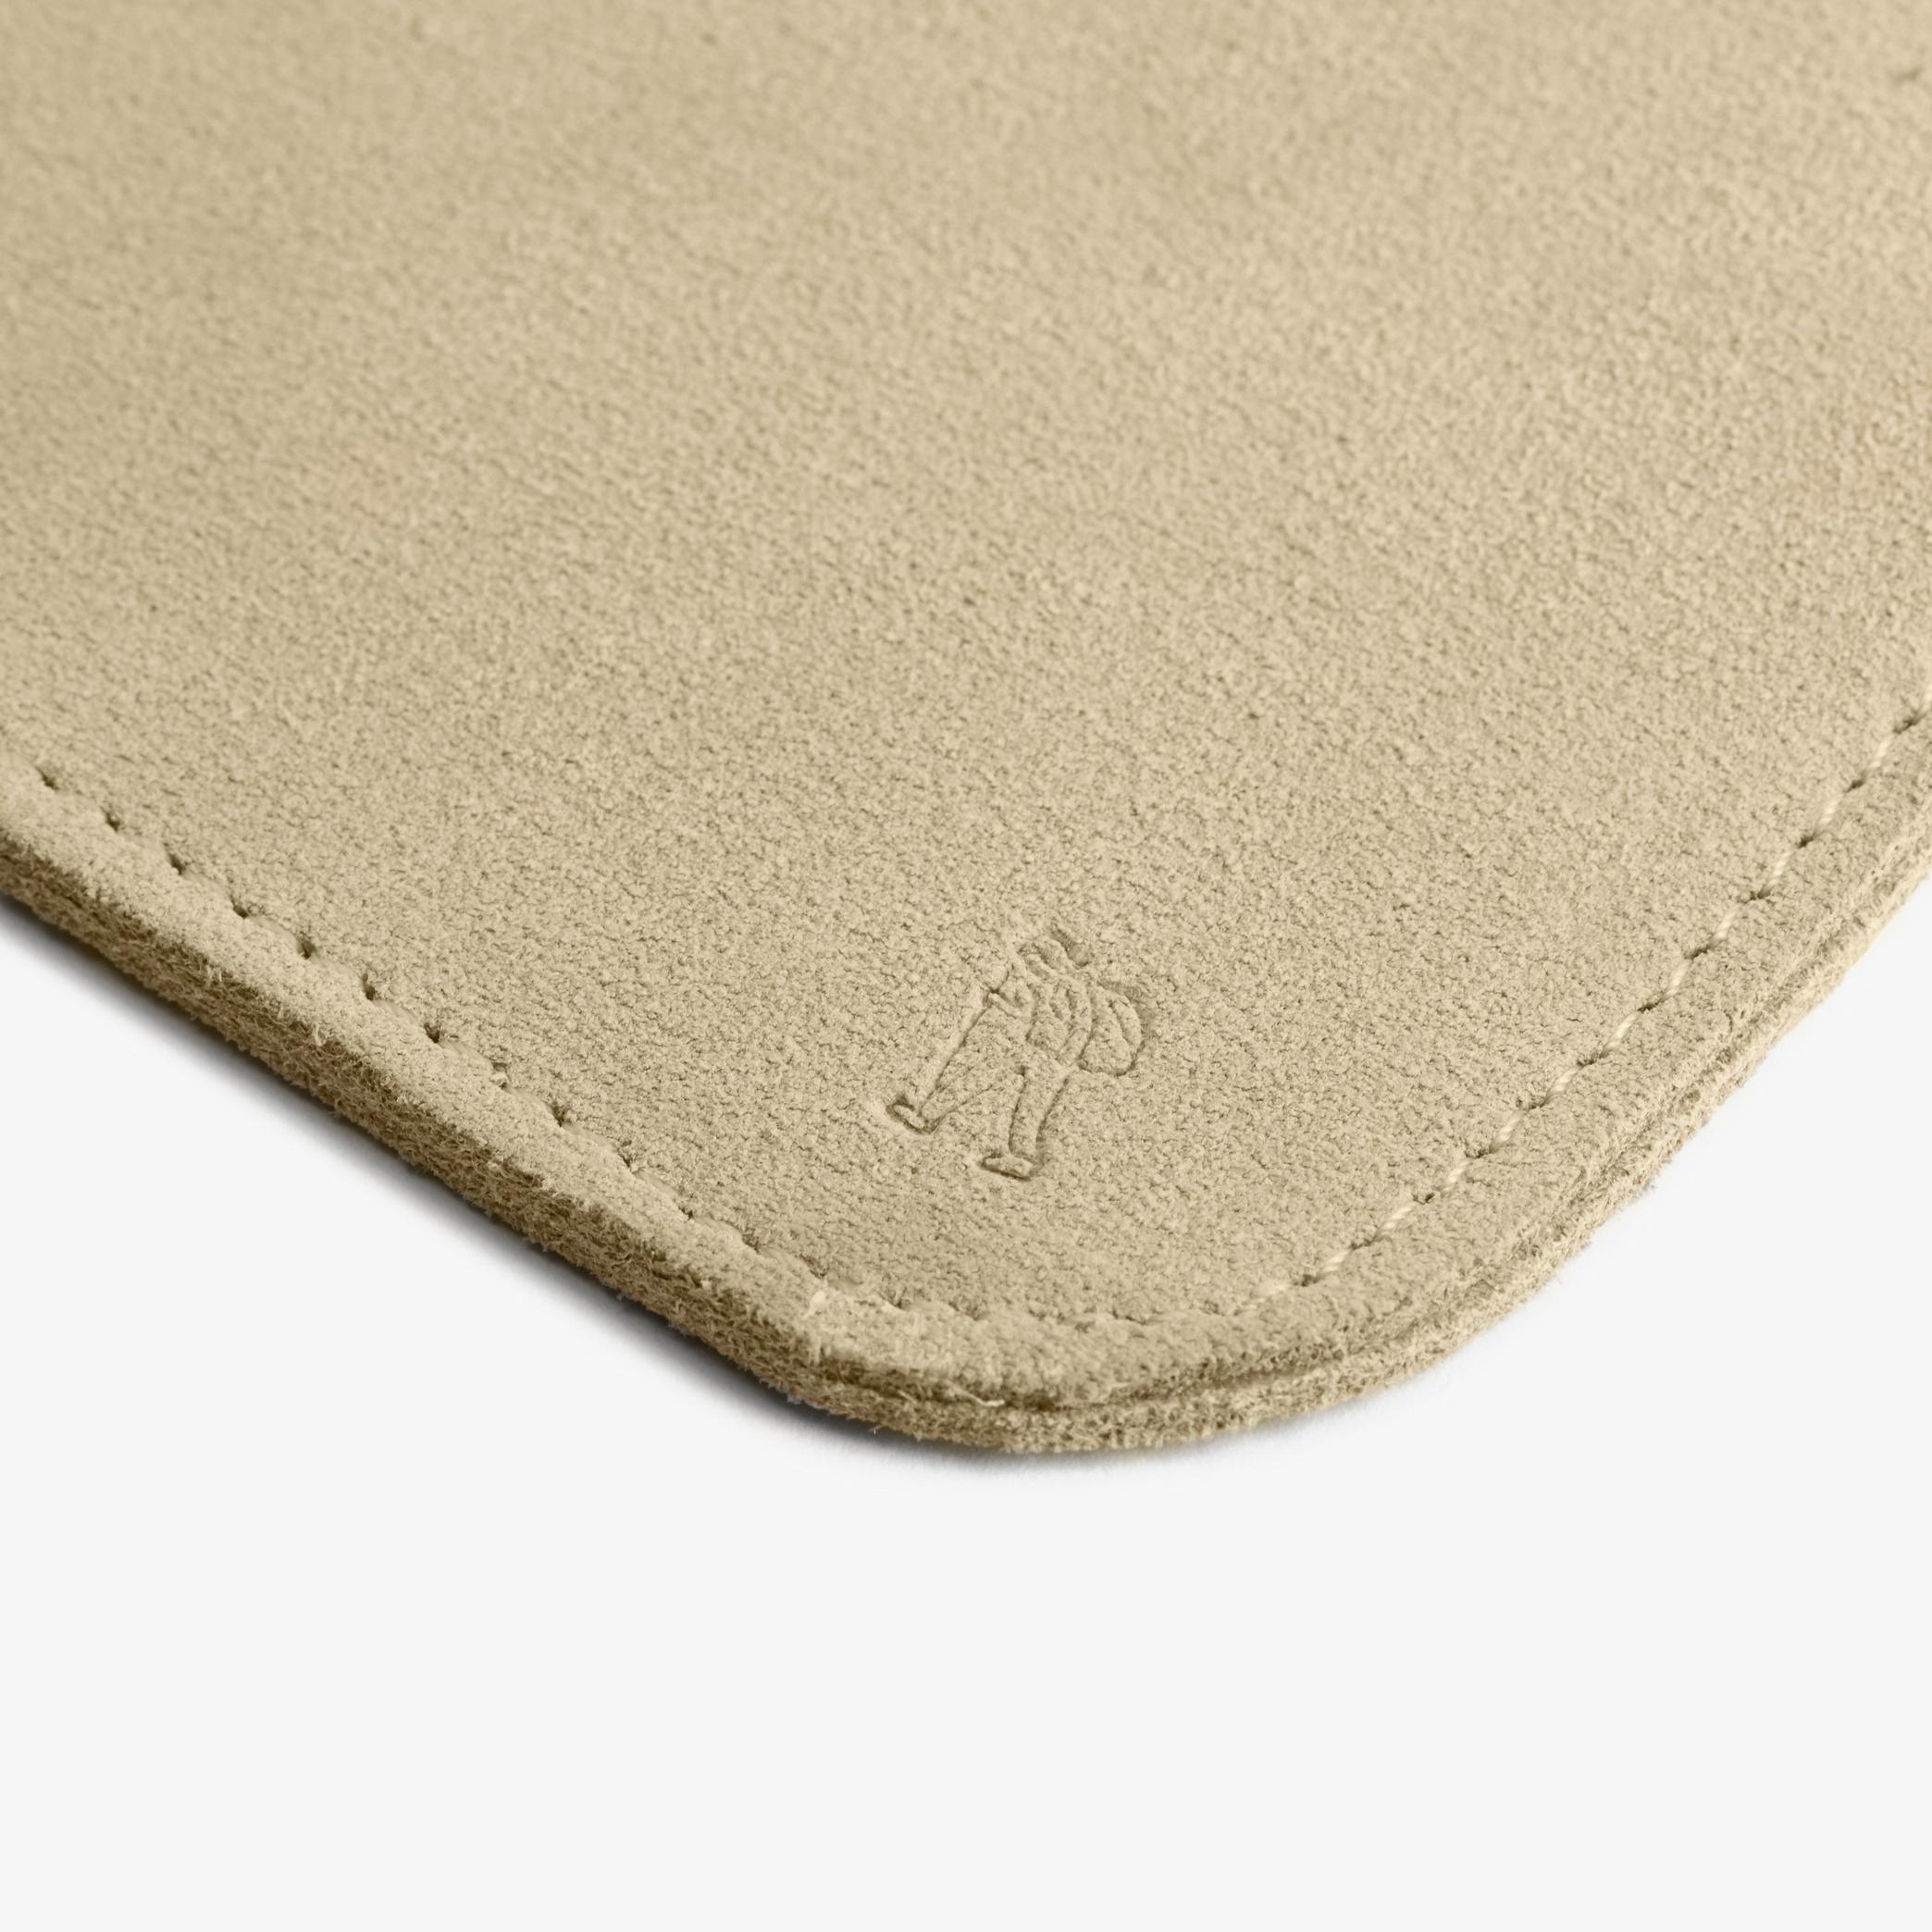 Wallabee Coin Maple Suede Wallet, view 3 of 3